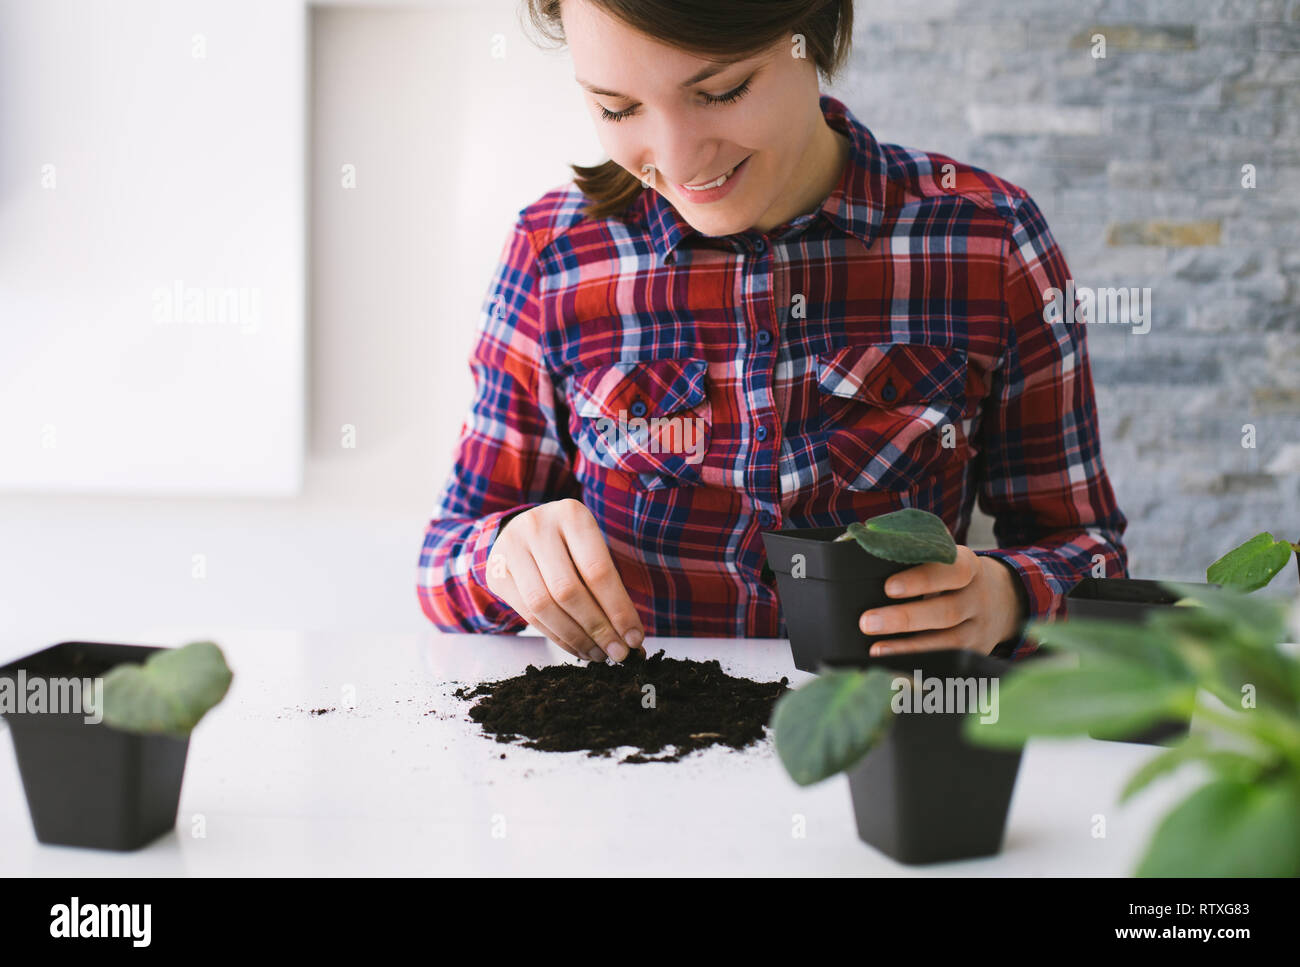 Woman home gardening relocating house plant Stock Photo